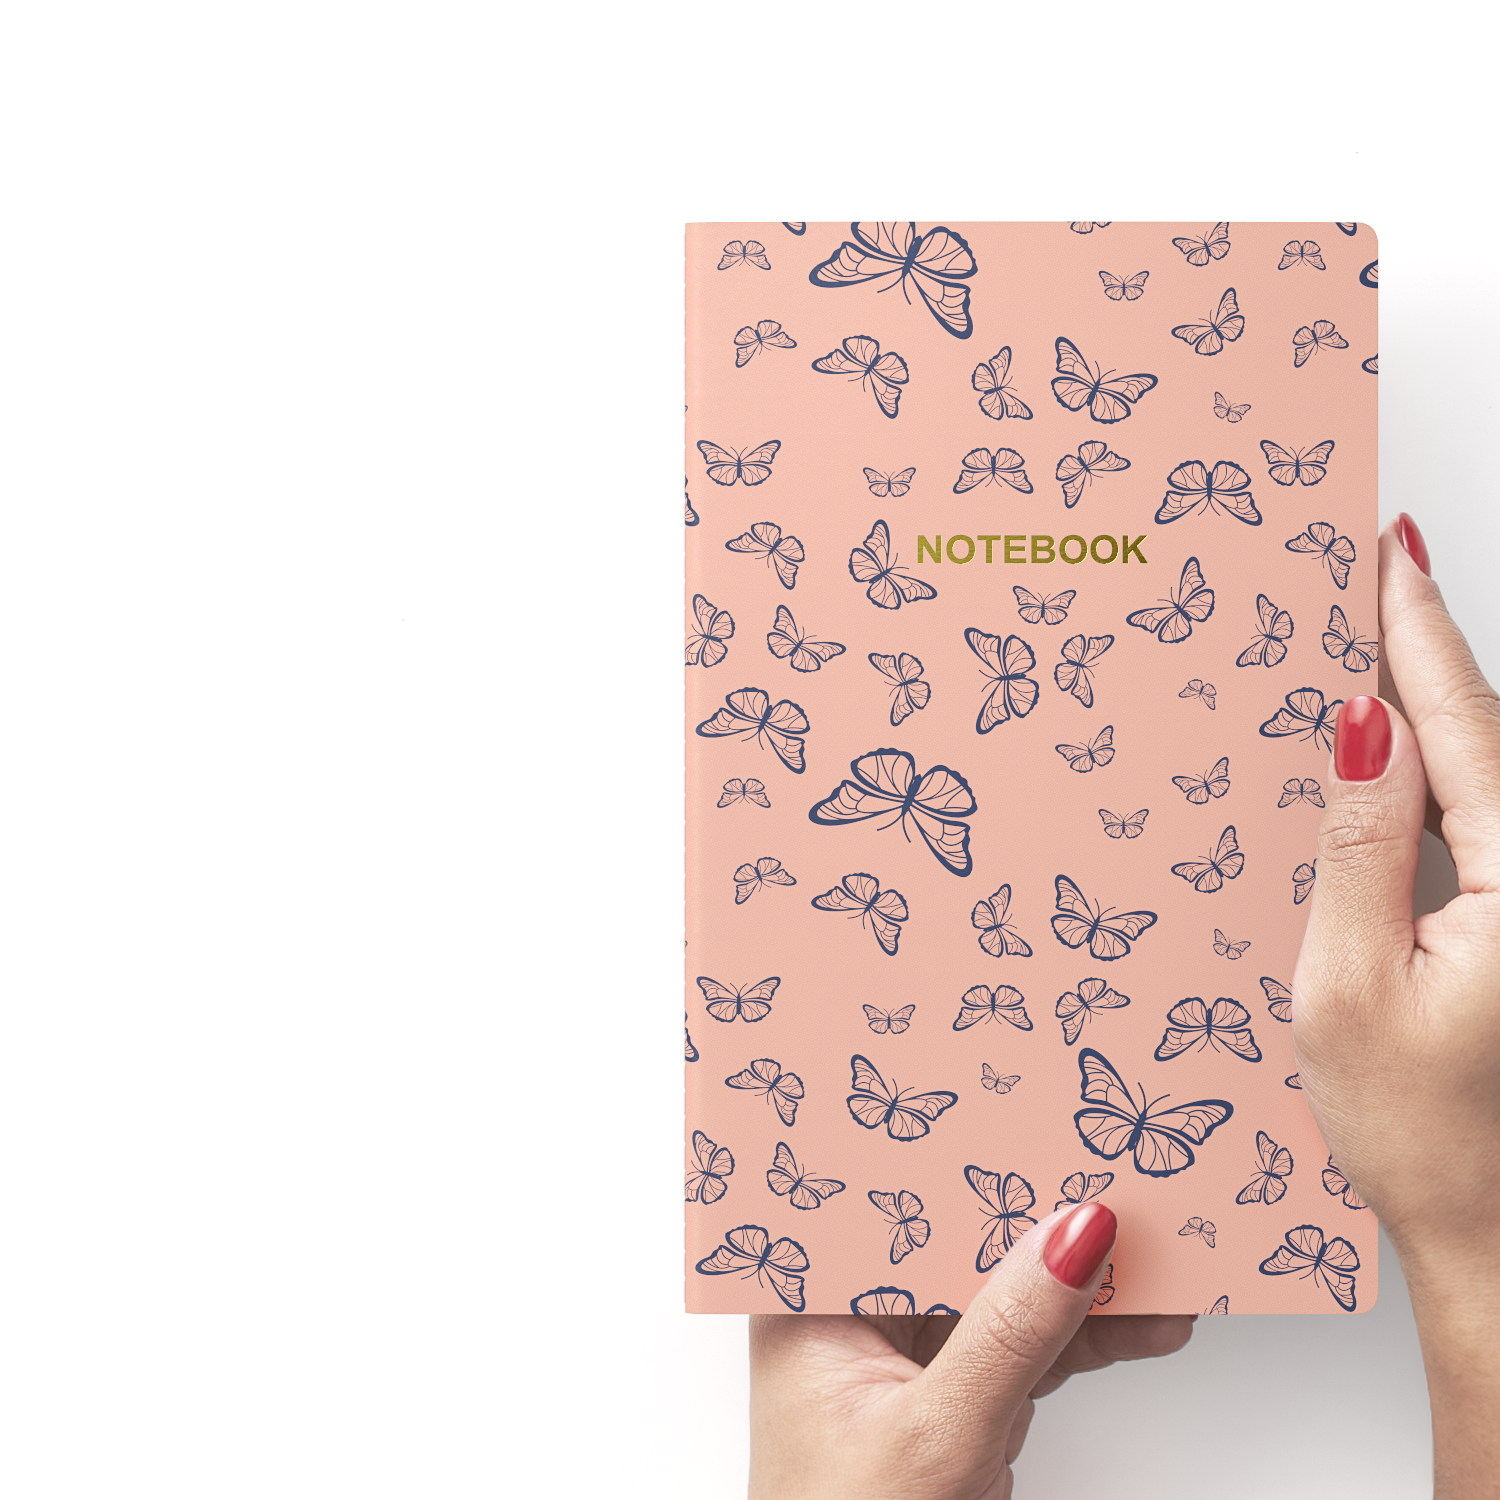 2018 Pocket Butterfly Silhouettes Small Diary x3 Week to View